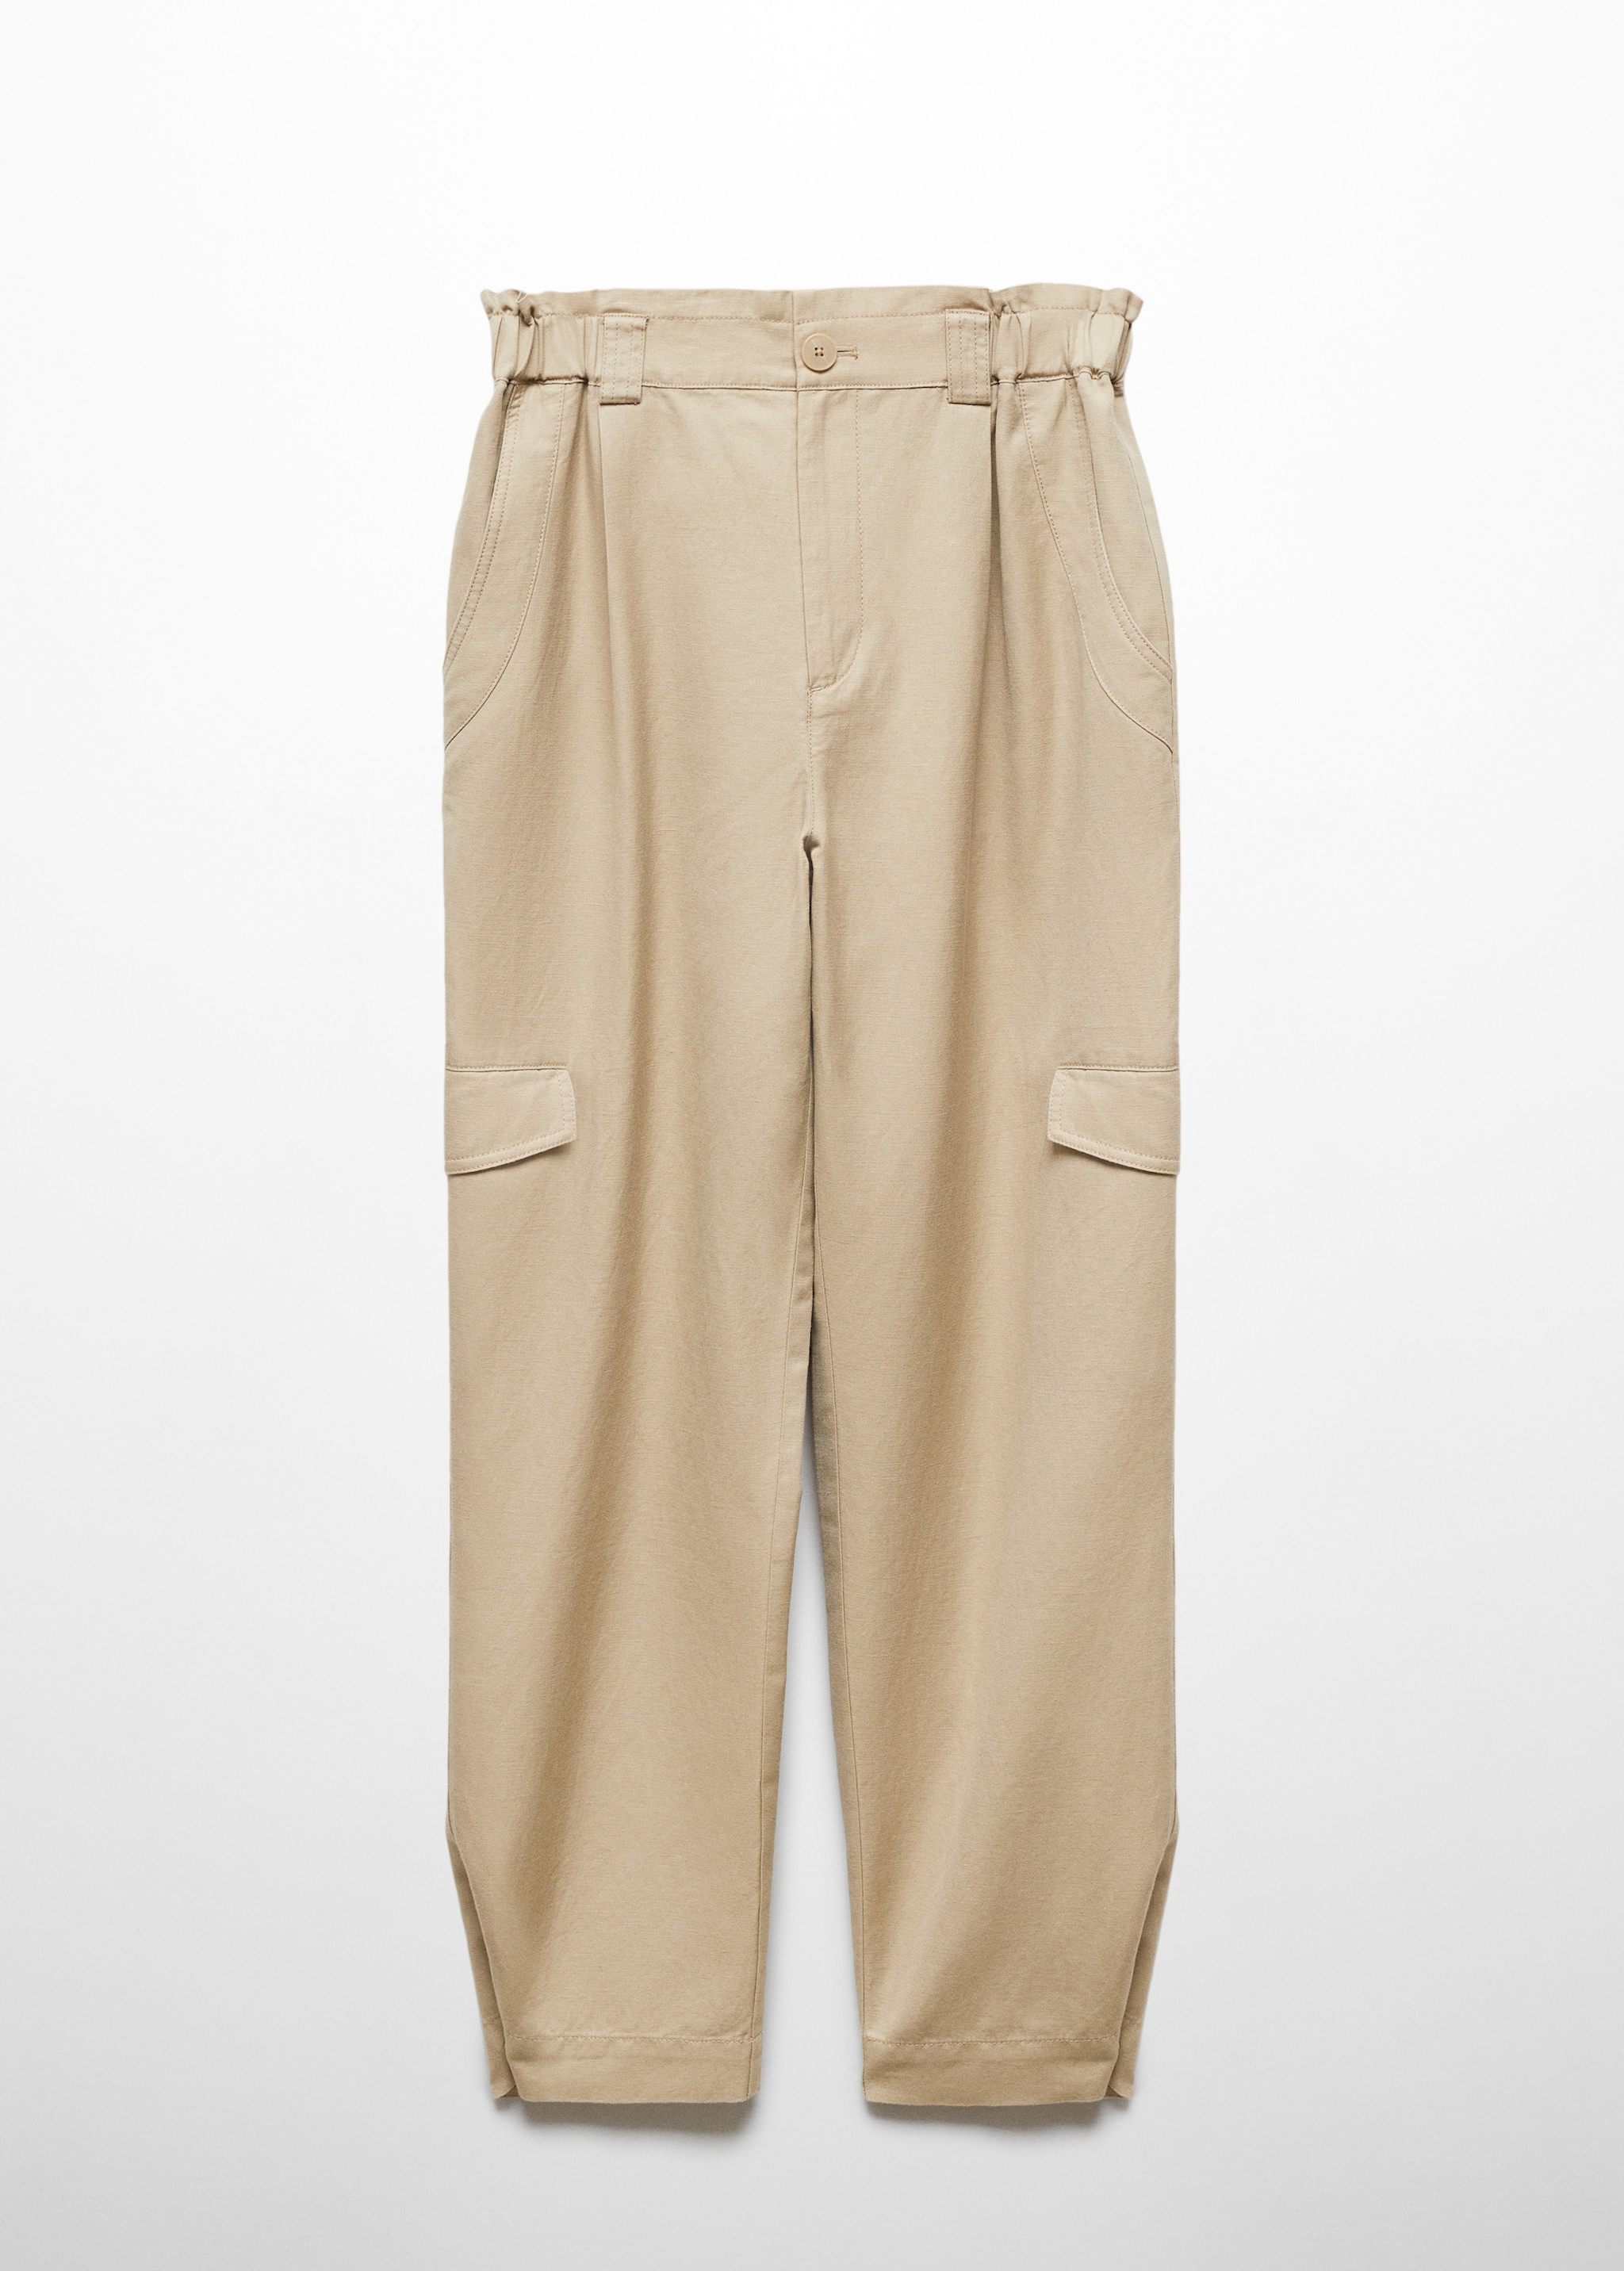 Linen cargo pants - Article without model